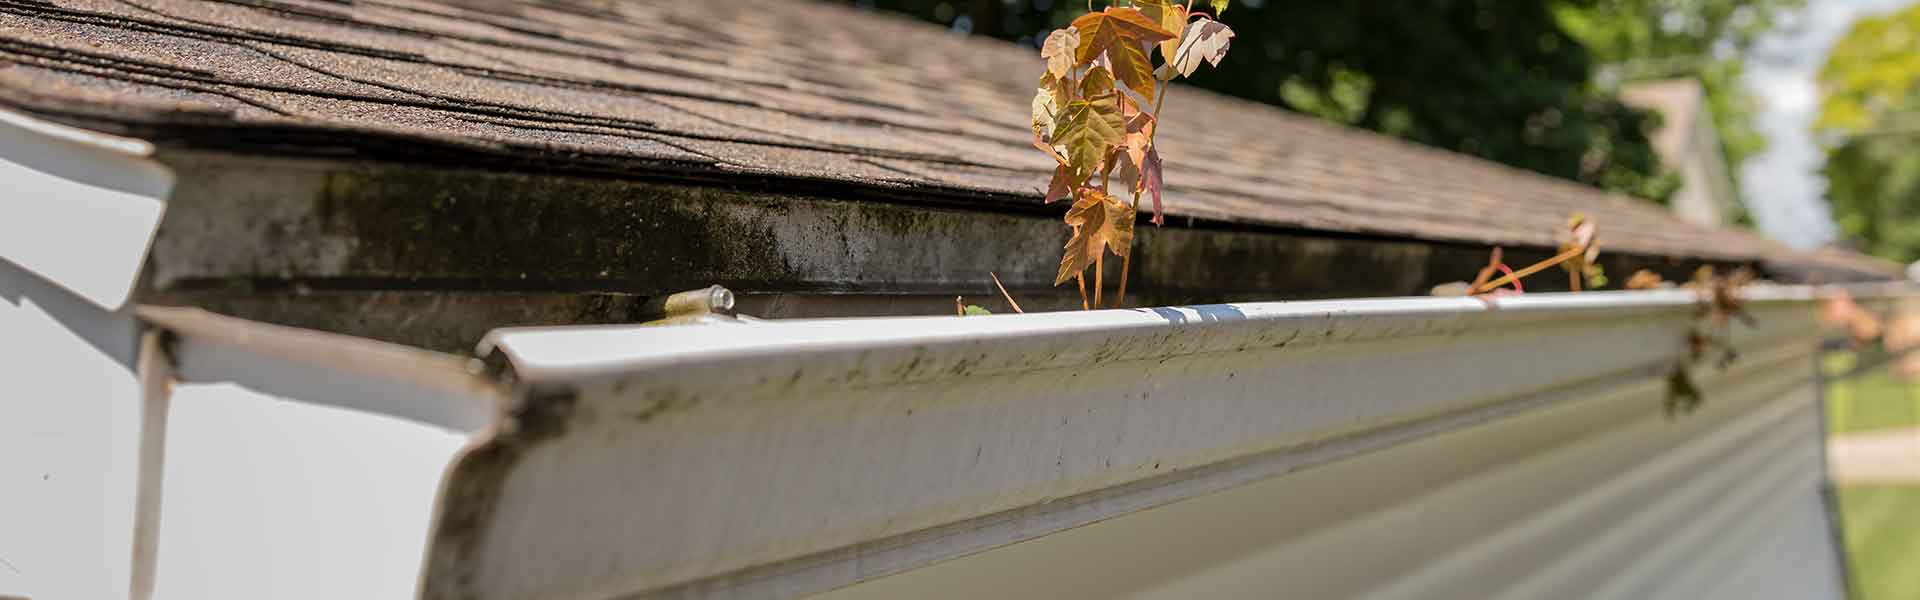 clogged gutter on a home